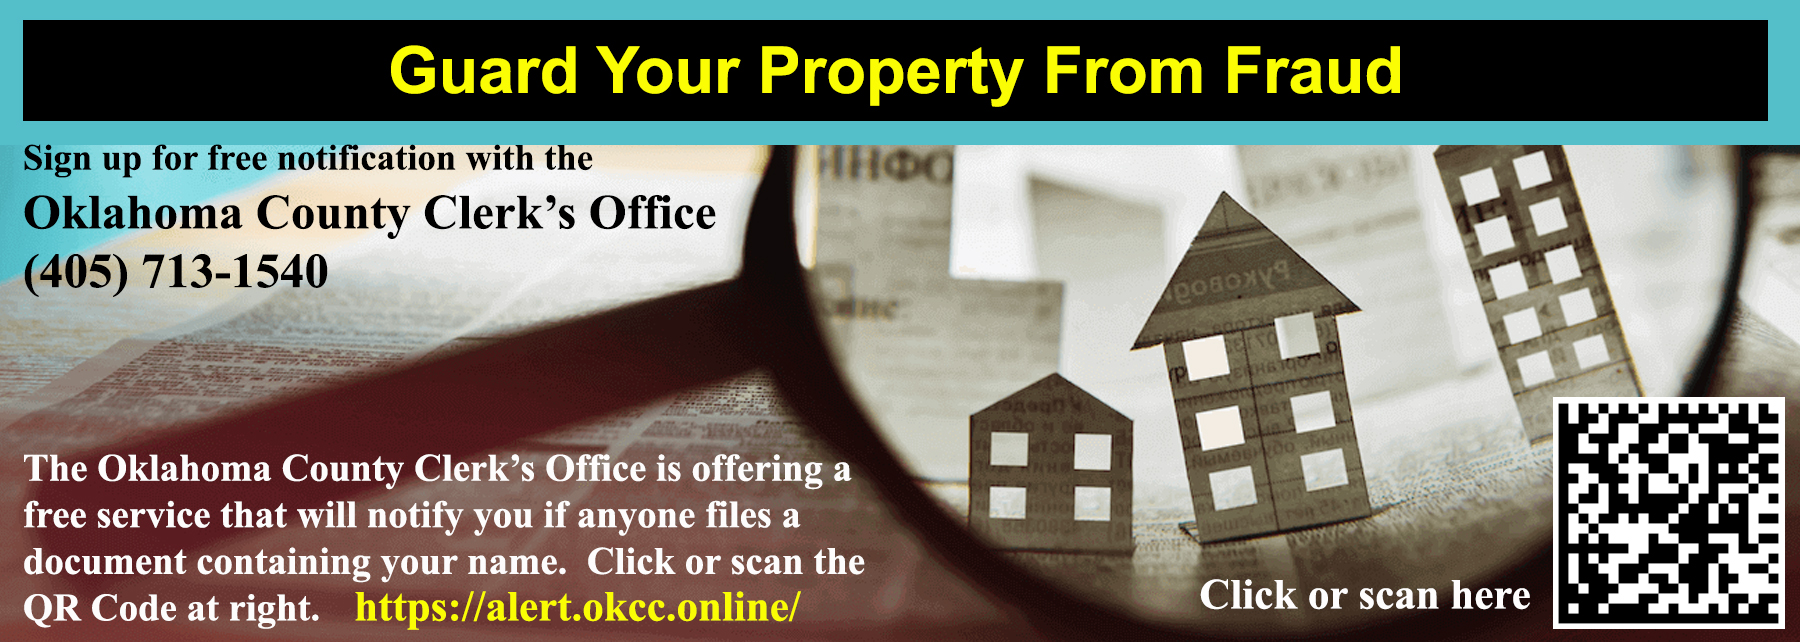 Guard Your Property from Fraud